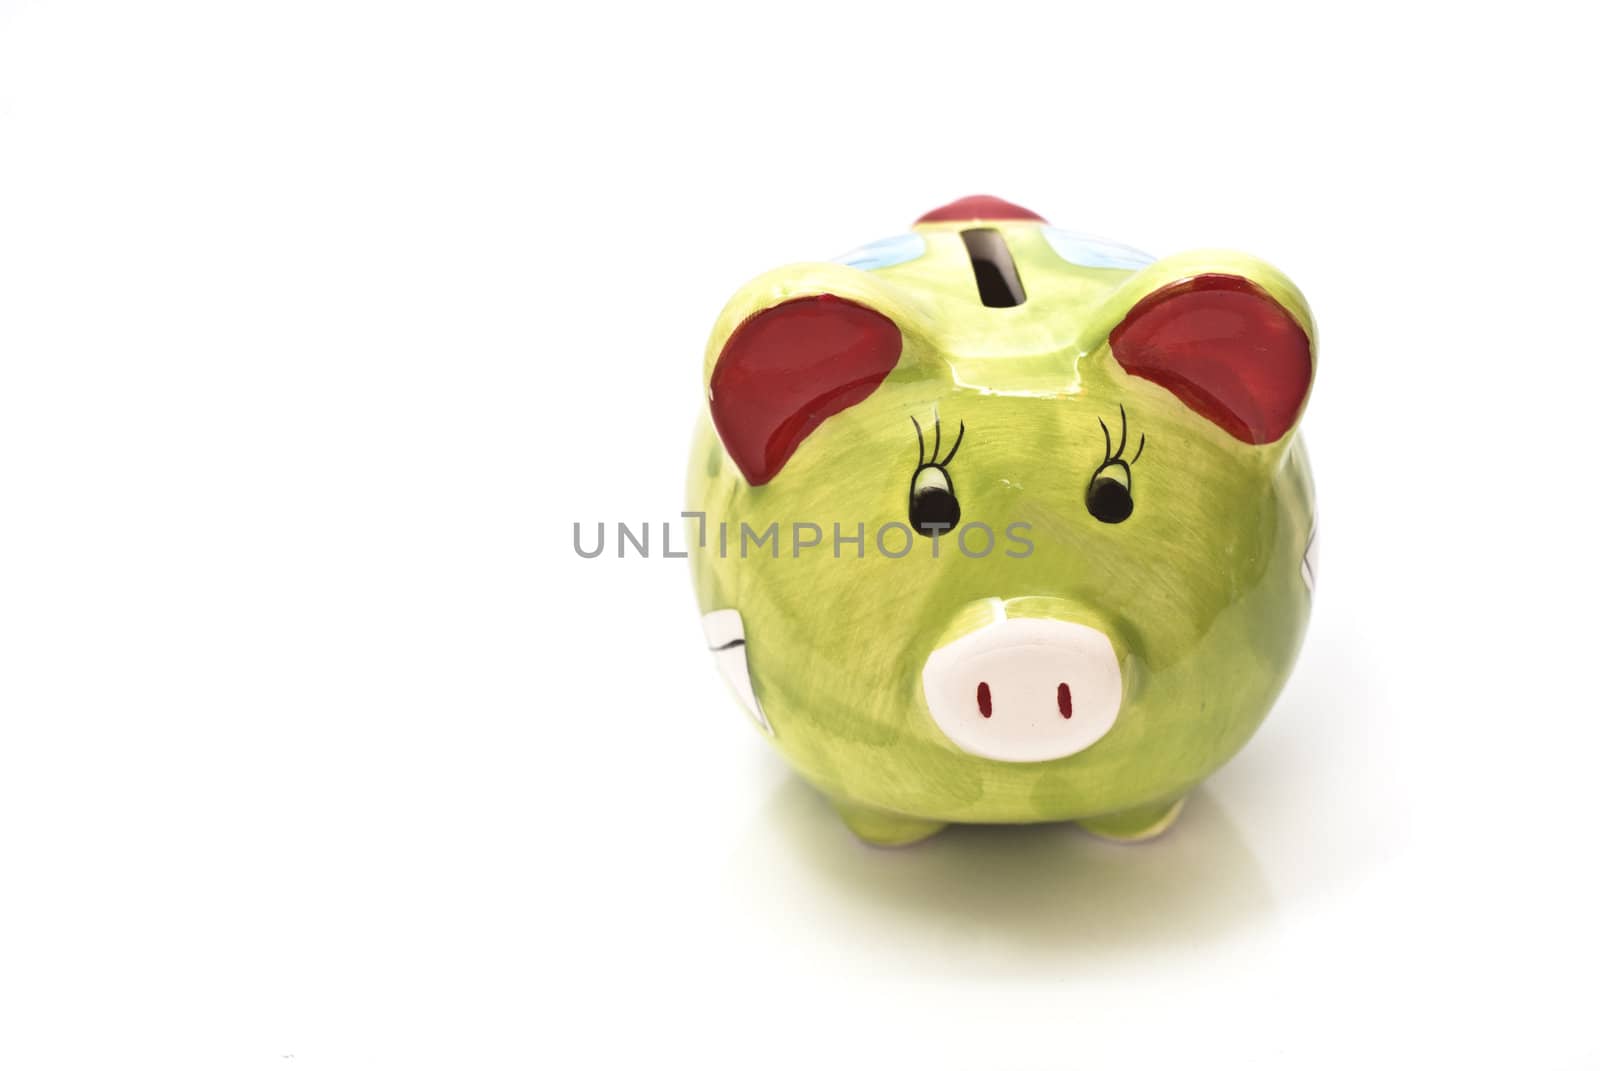 Pretty piggy bank empty, isolated in white background. Financial crisis concept